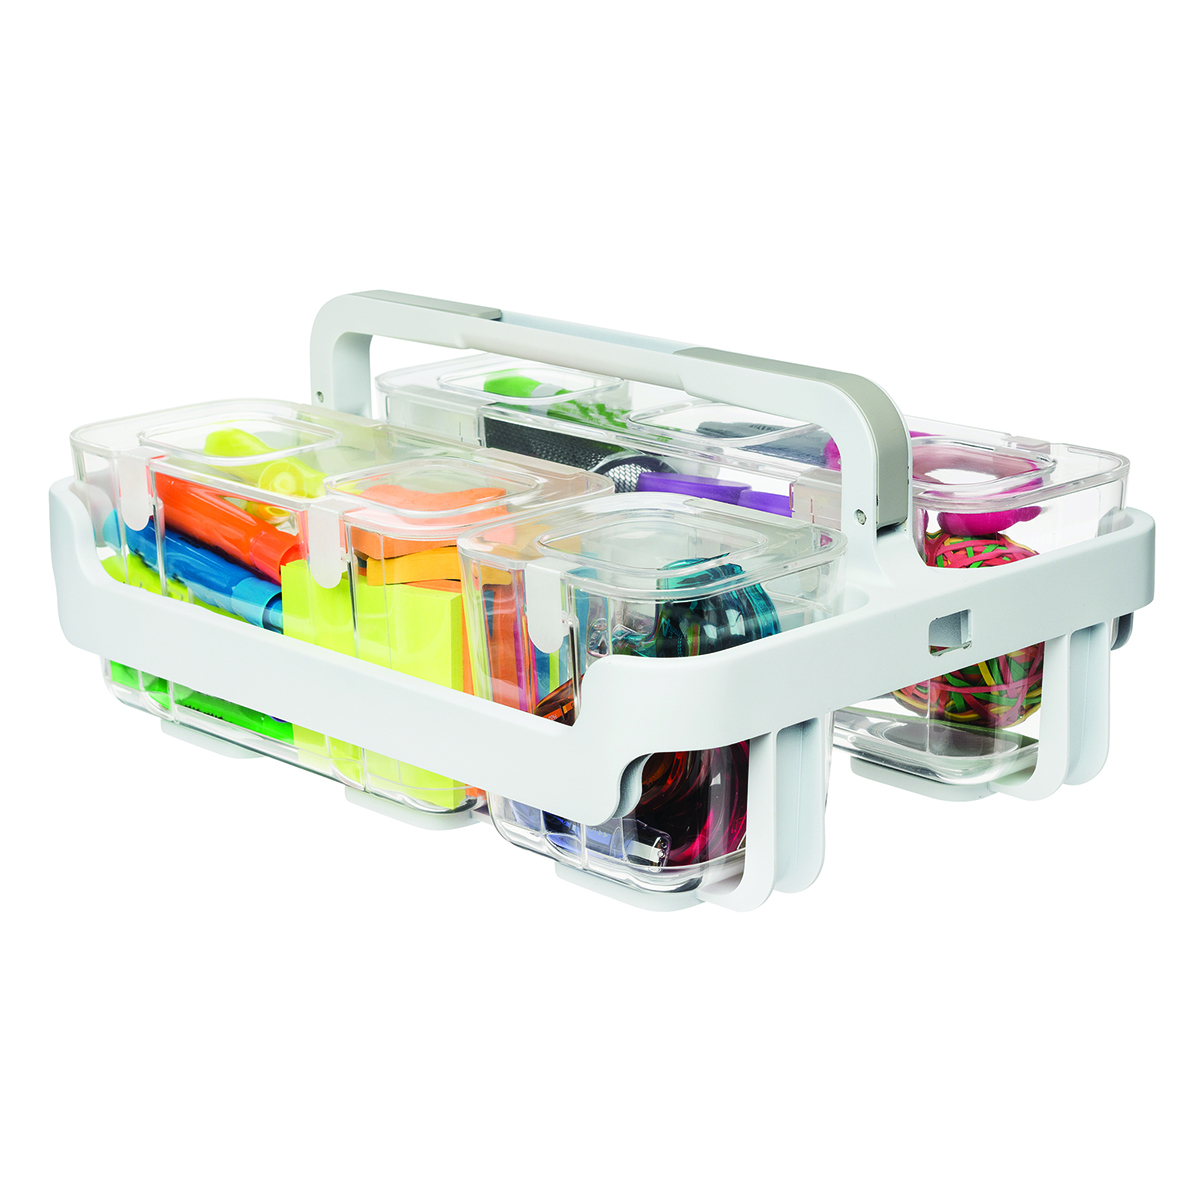 https://www.containerstore.com/catalogimages/392459/10080739-Deflecto-Caddy-Organizer-Fr.jpg